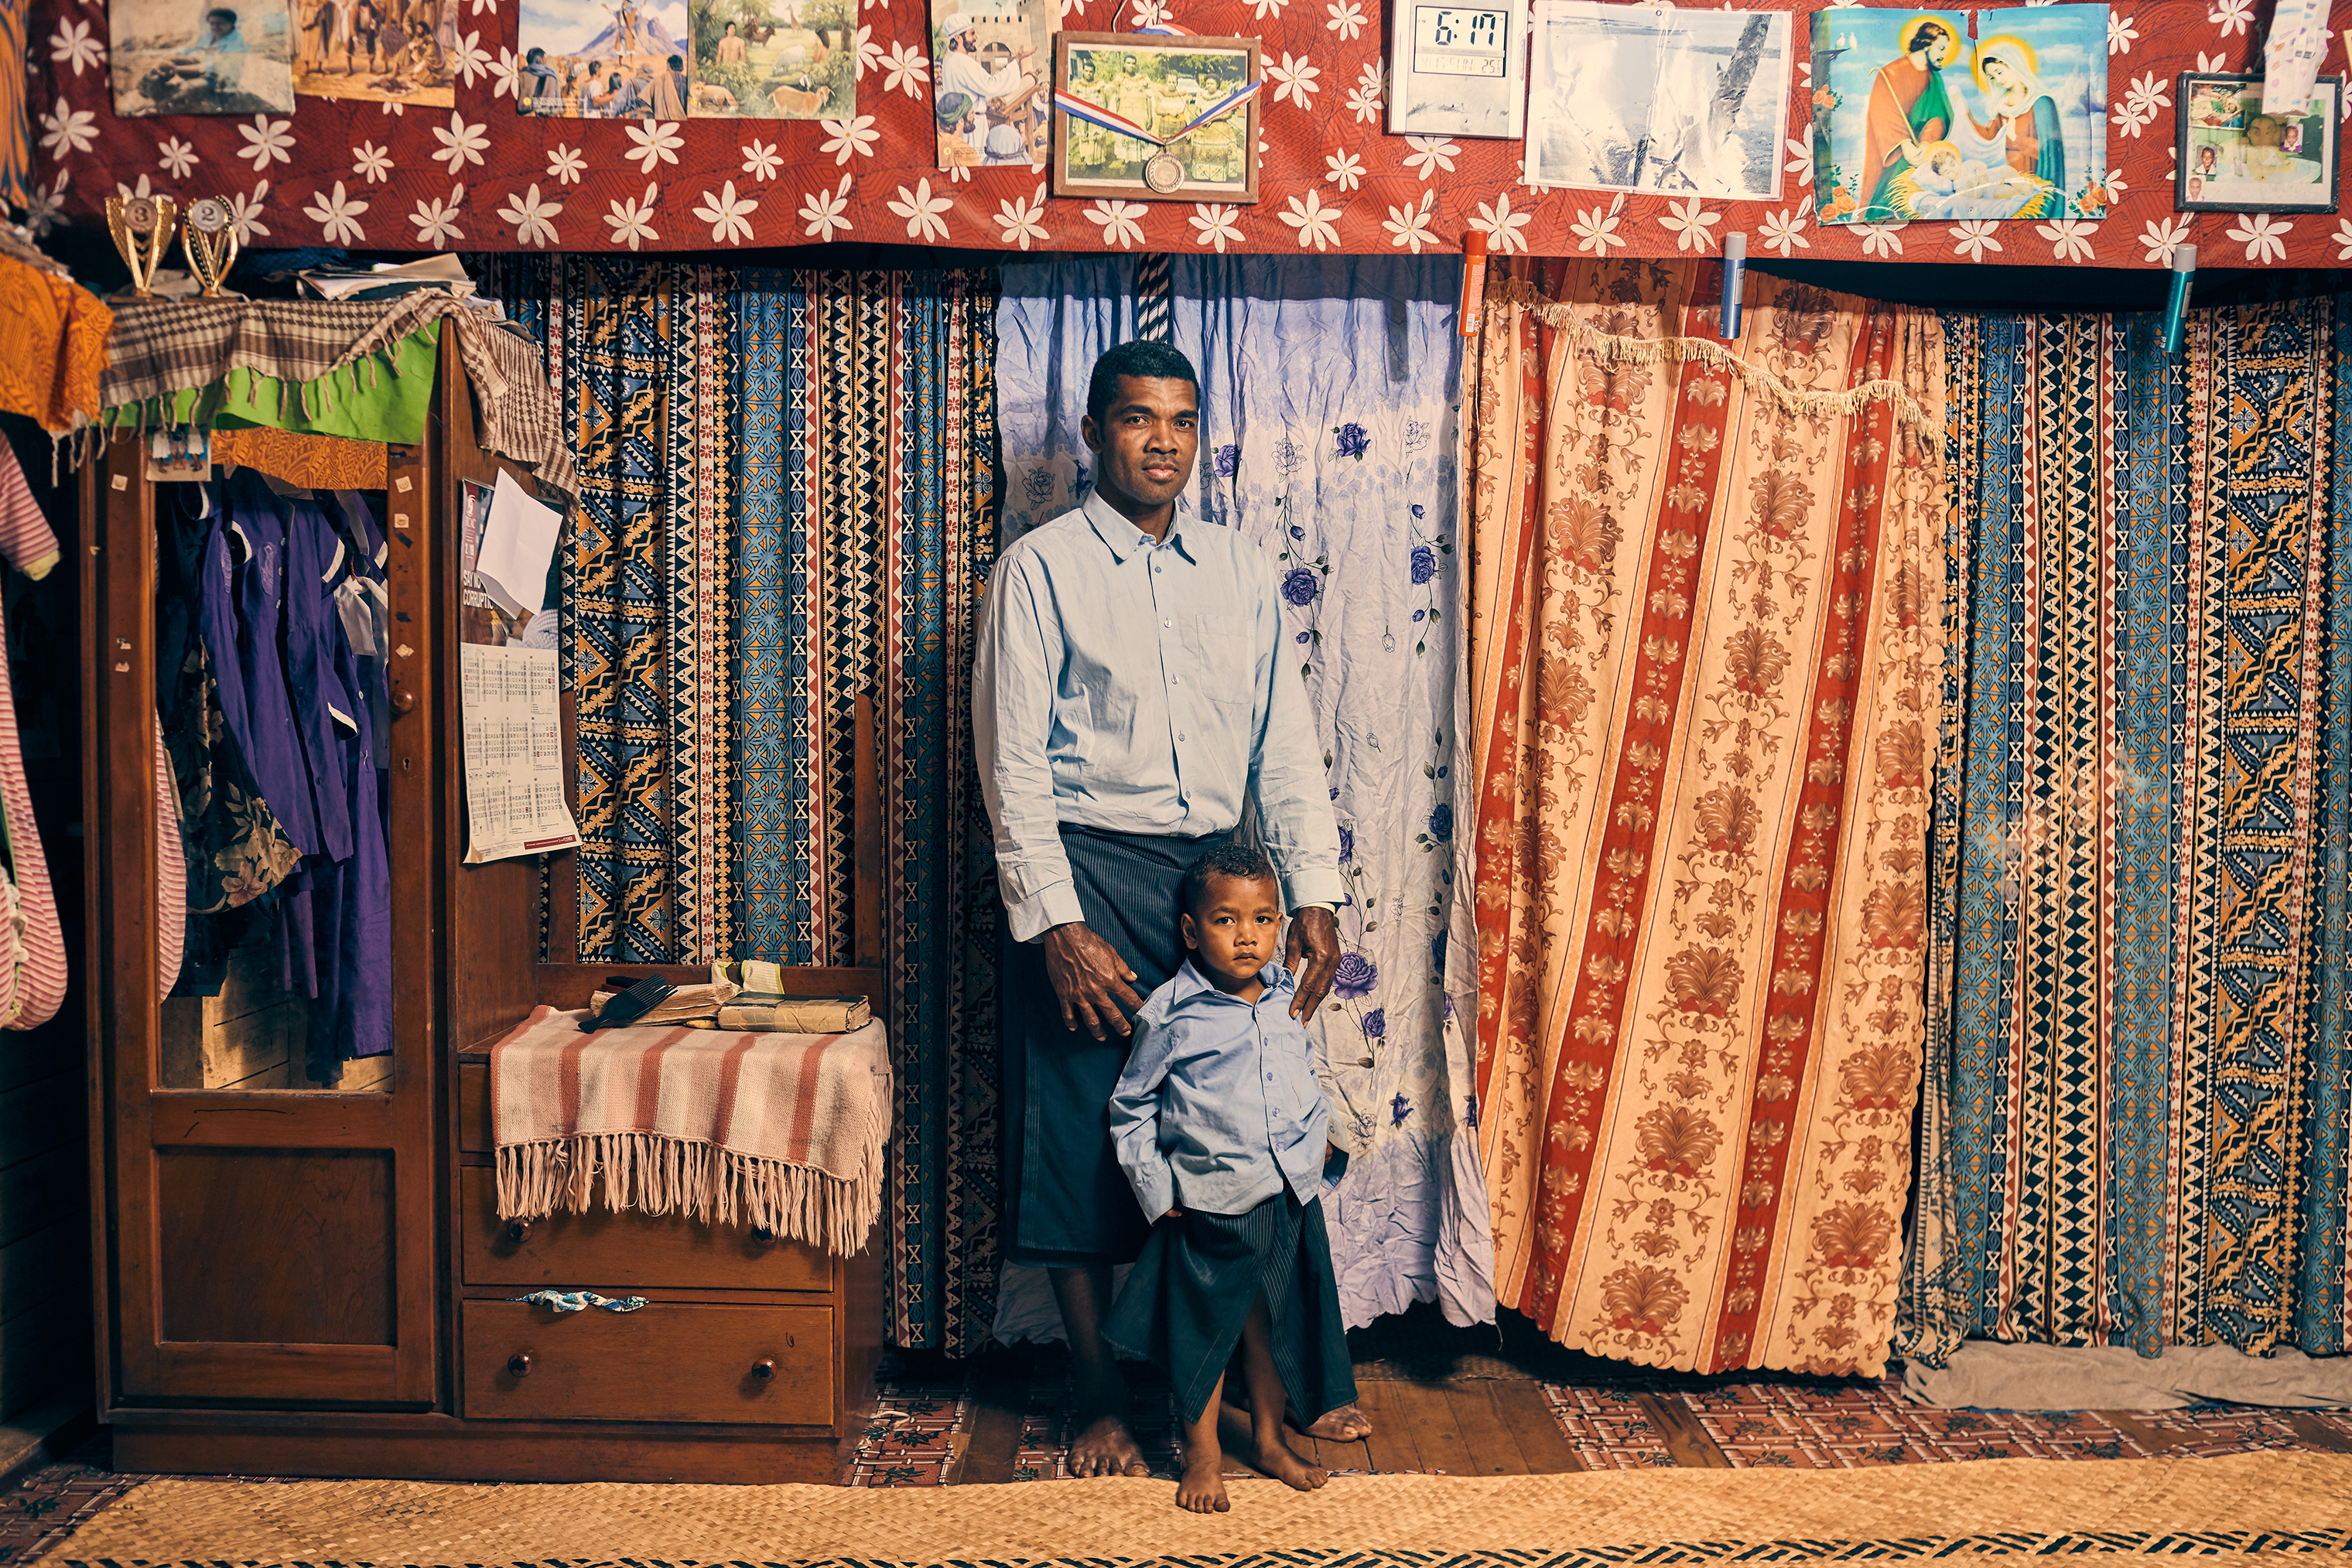 Apisai Logaivau and his son Simione Botu in their home in the relocated village. Logaivau lives here with his wife and four other children. (Christopher Gregory for TIME)